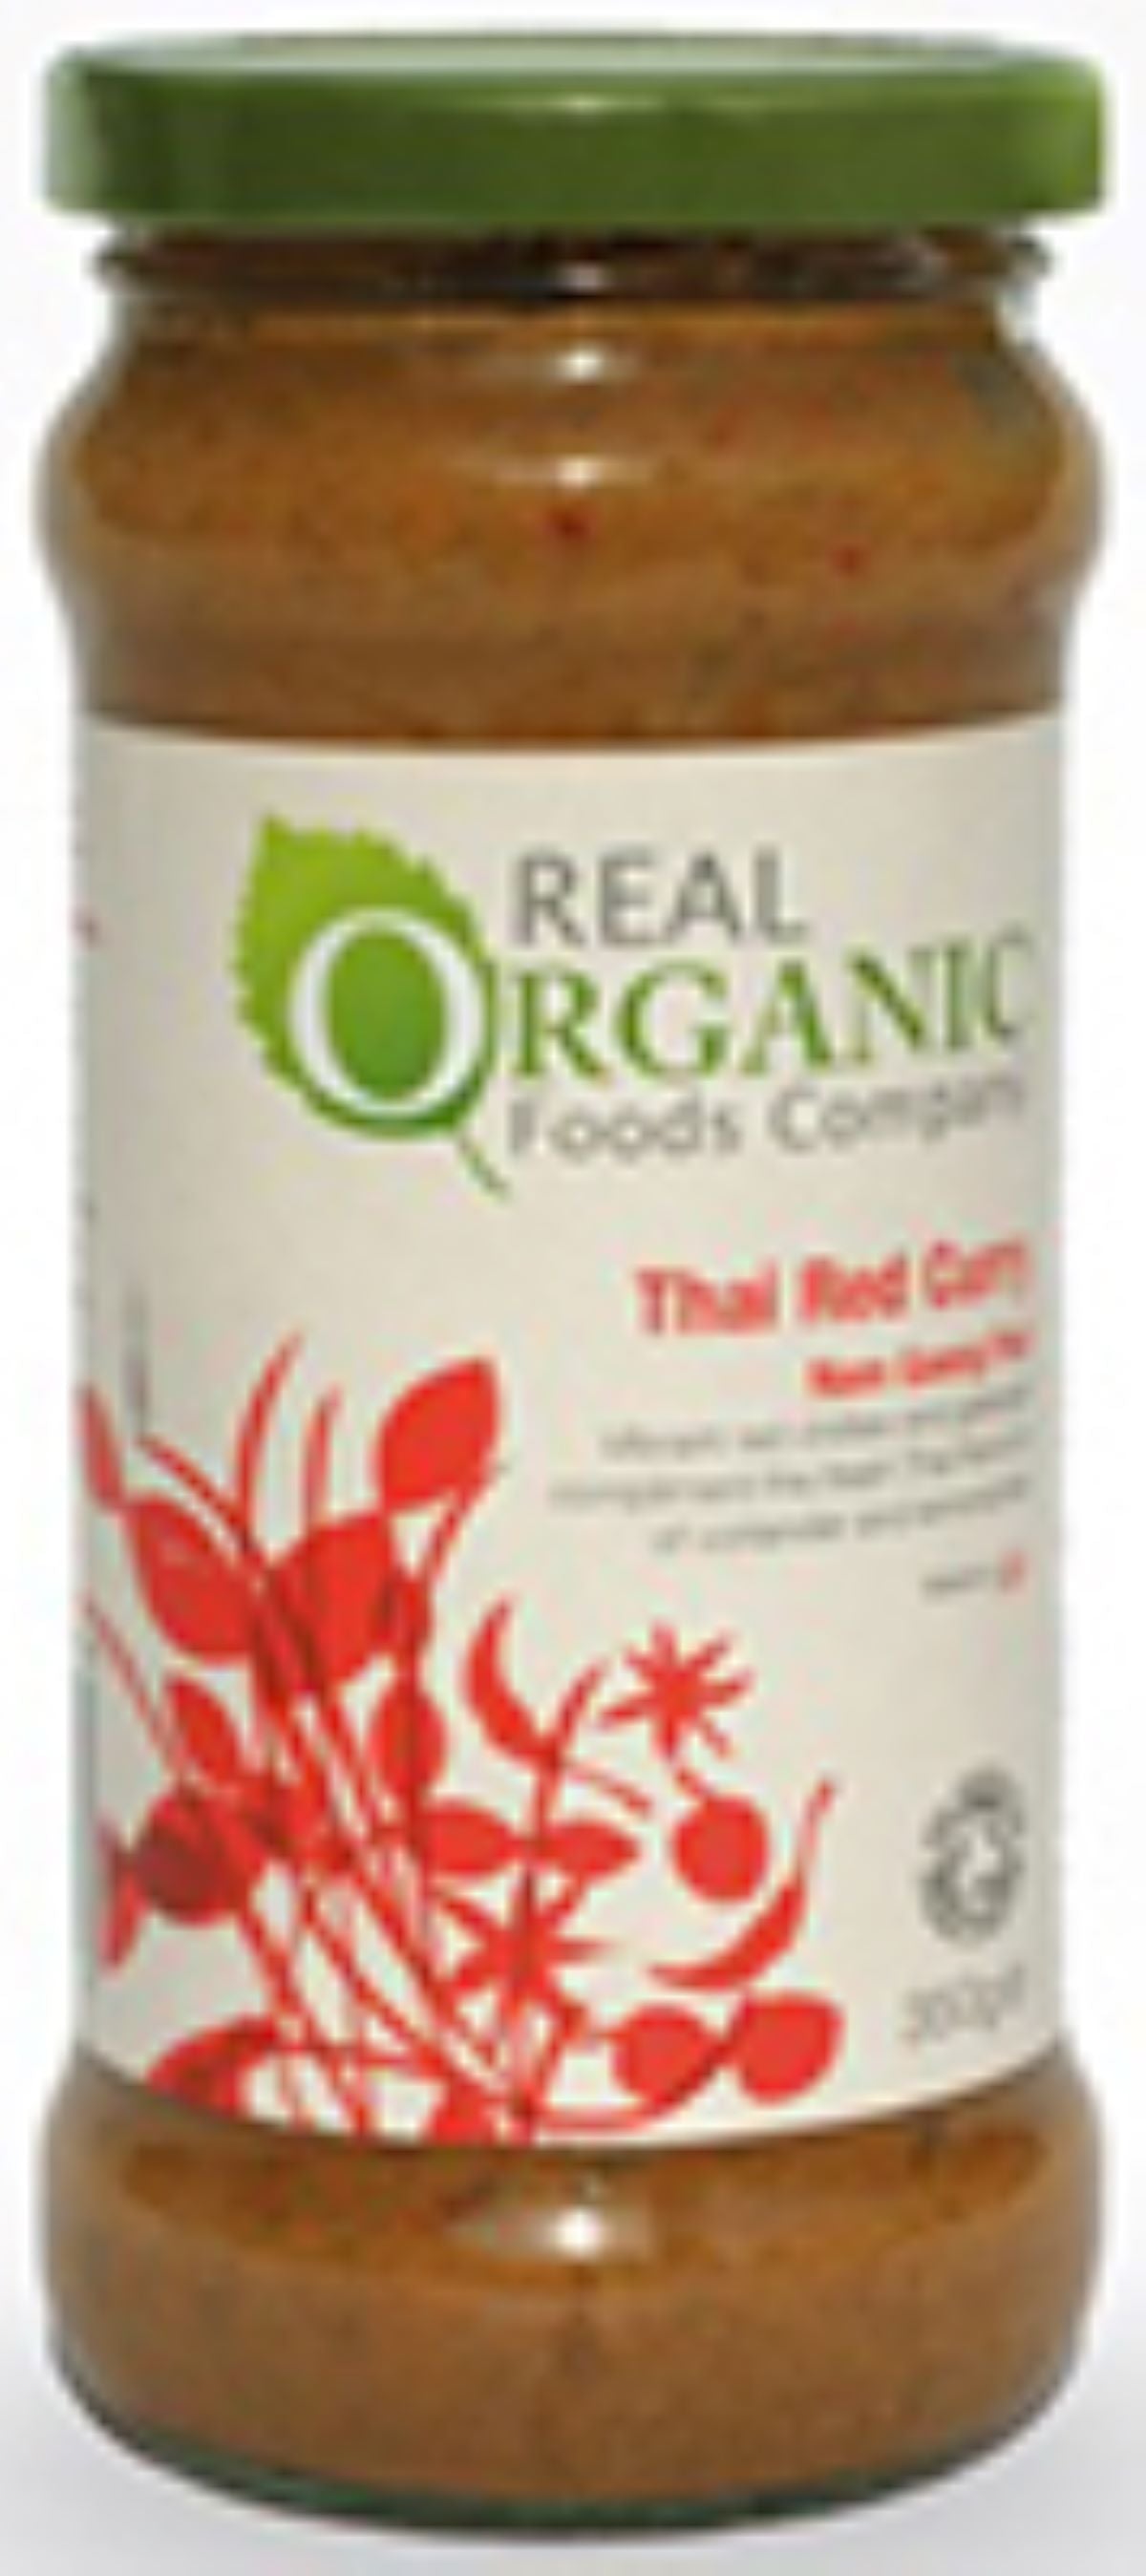 Real Organic Foods Company Thai Red Curry Organic 335g